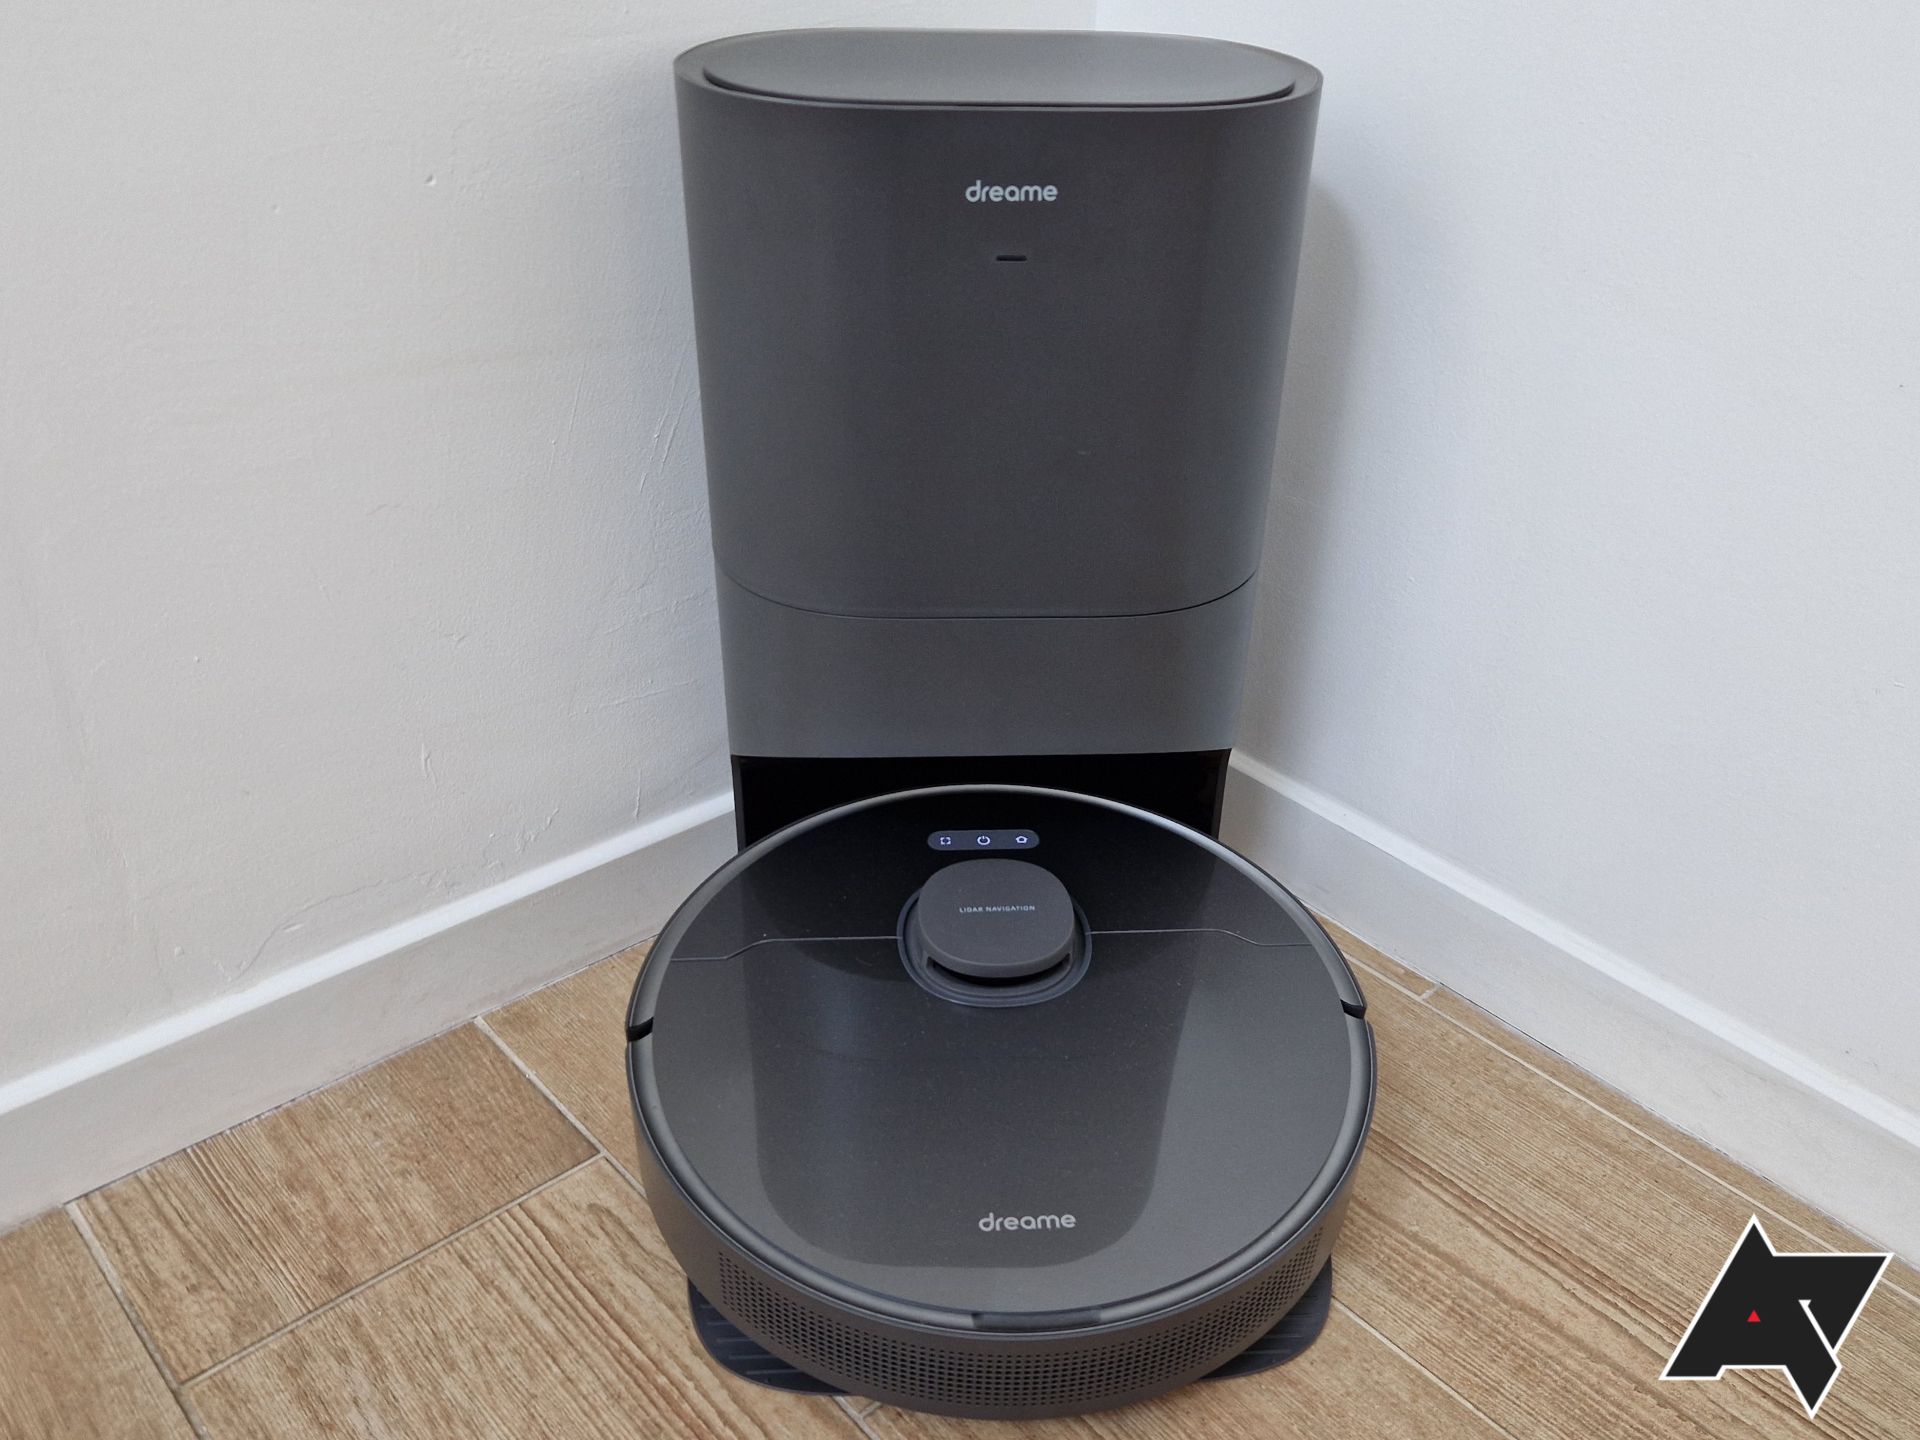 DreameBot L10s Ultra automates the cleaning of your home - Phandroid